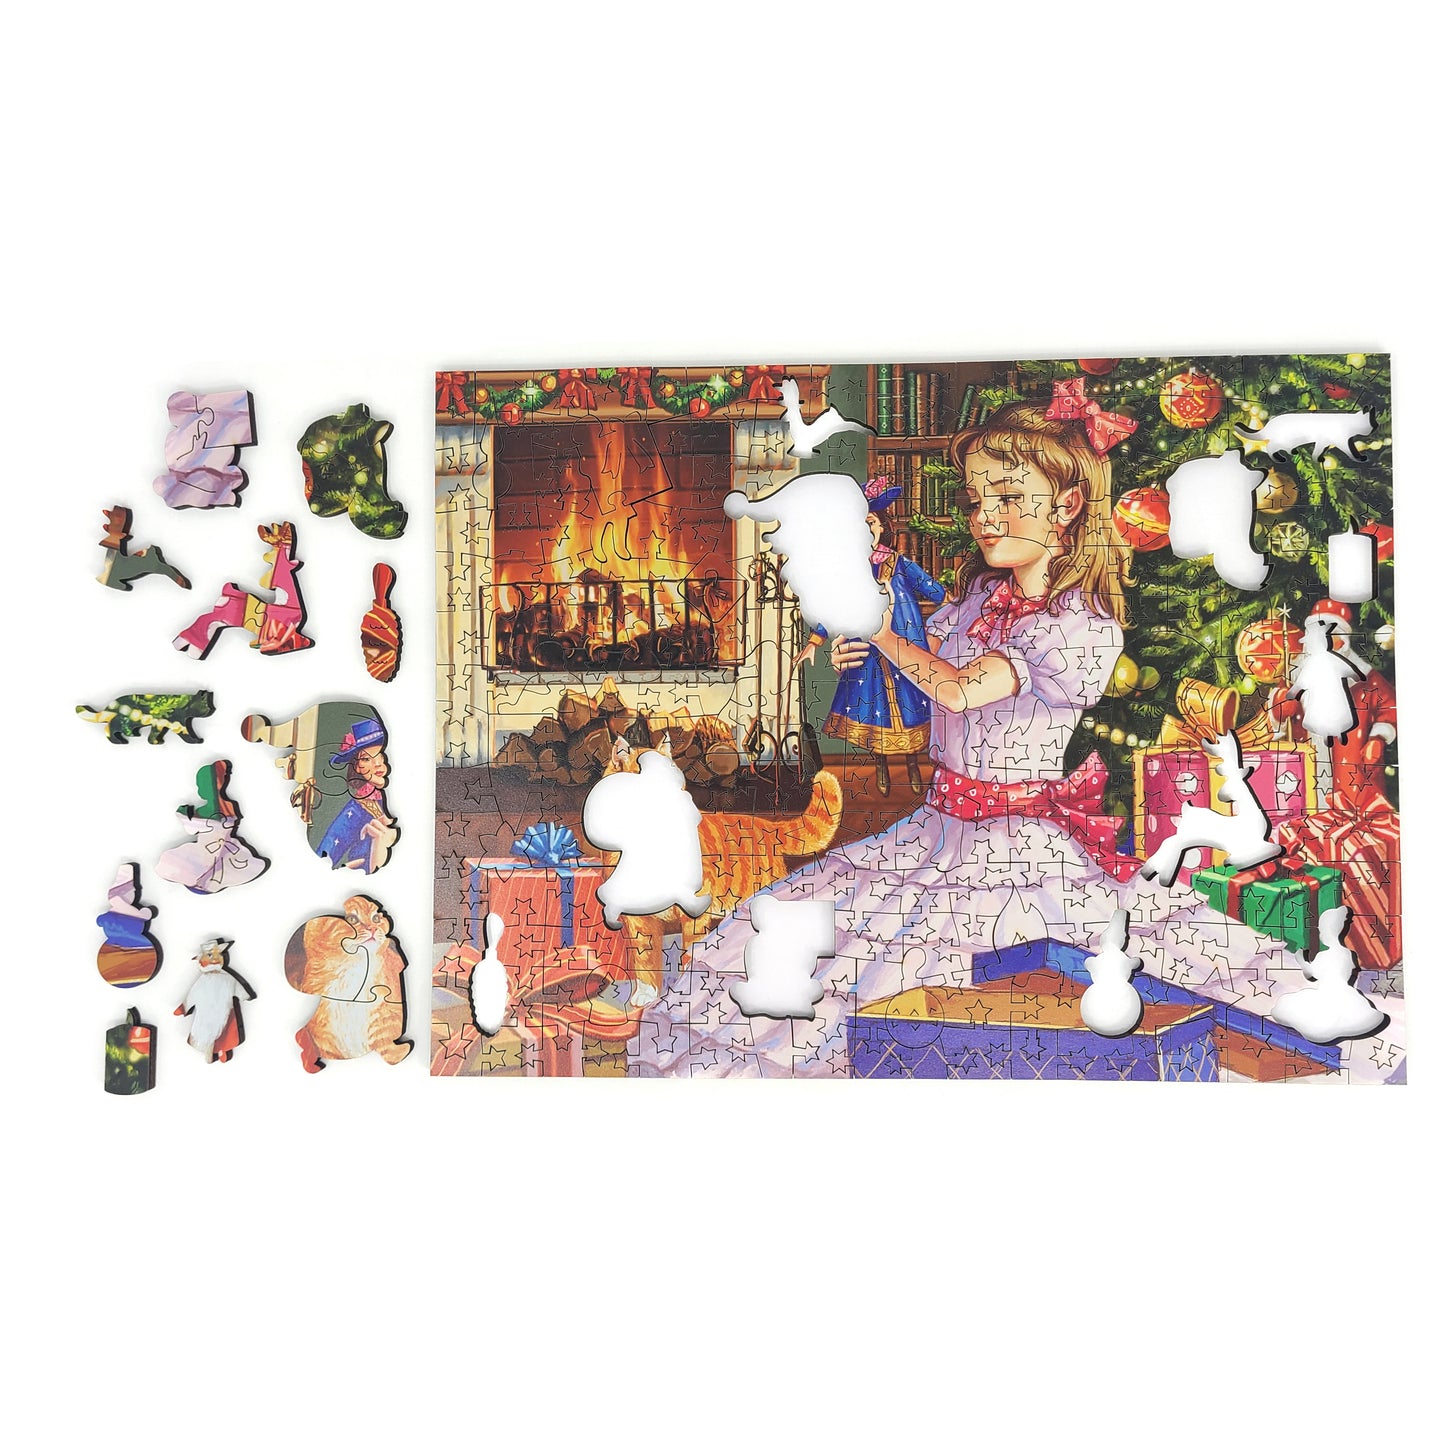 Large Format Wooden Jigsaw Puzzle with Uniquely Shaped Pieces for Seniors and Adults - 235 Pieces - Christmas Gift